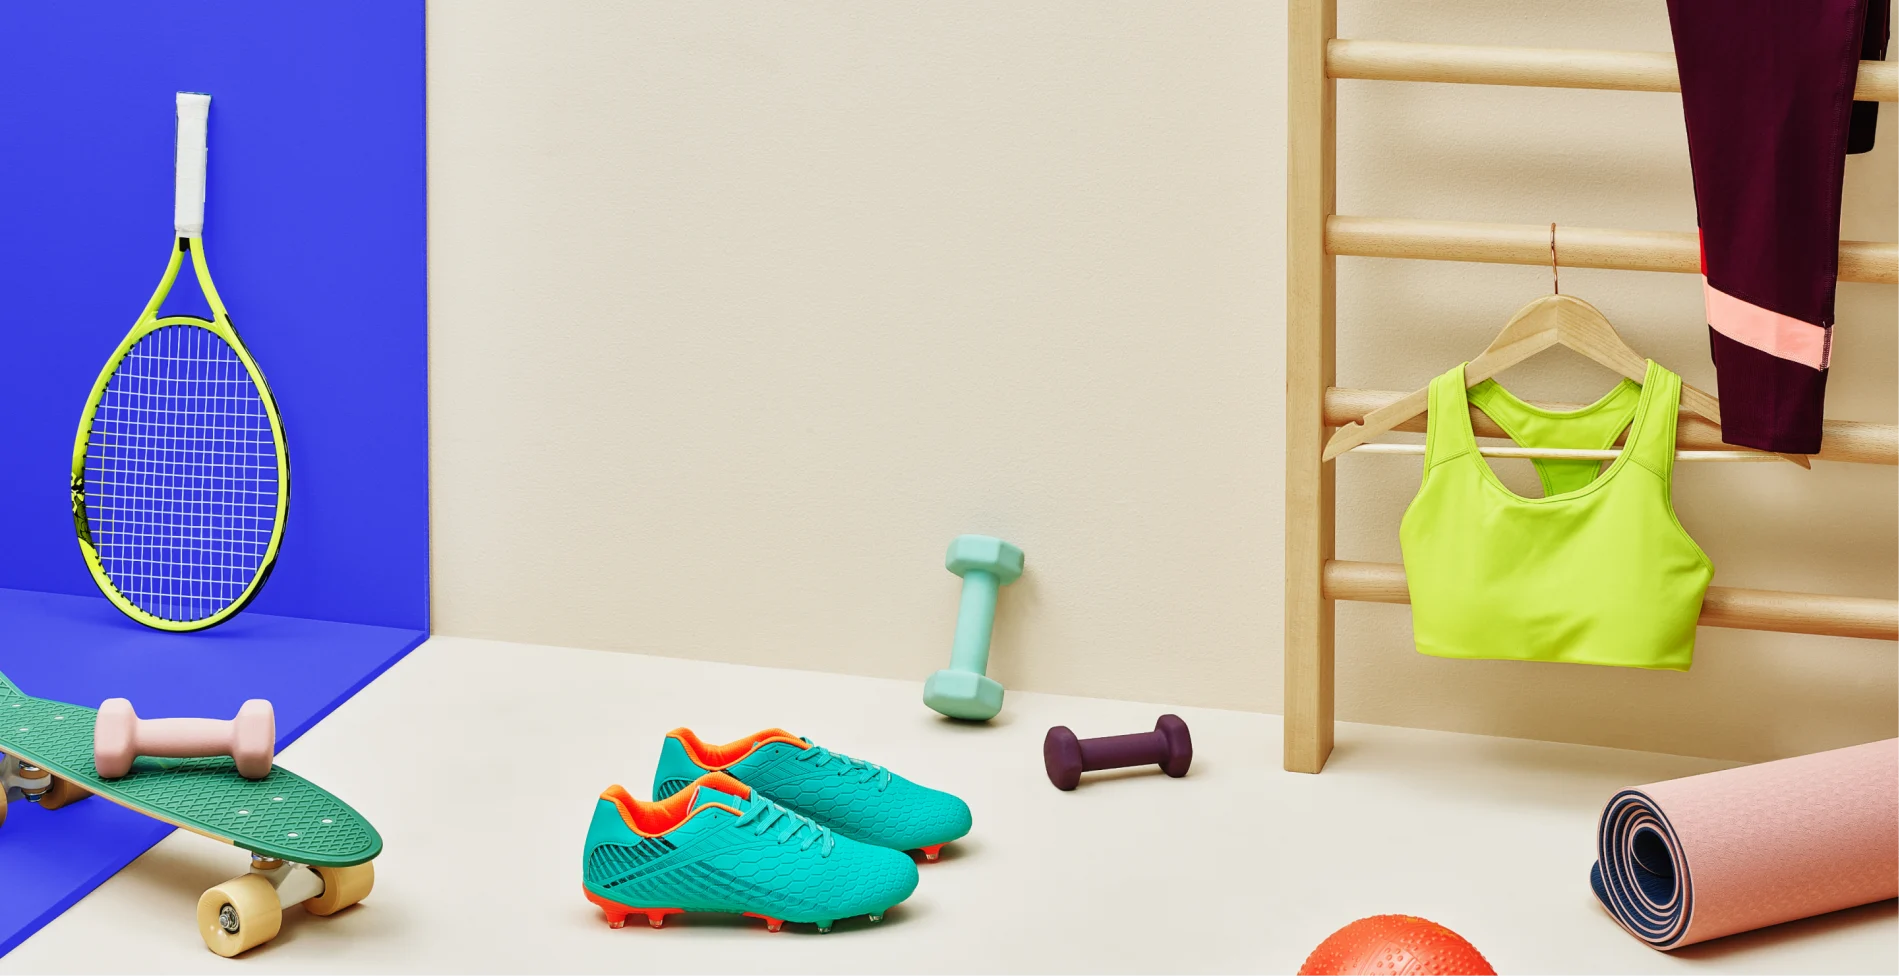 Workout and sports equipment on floor